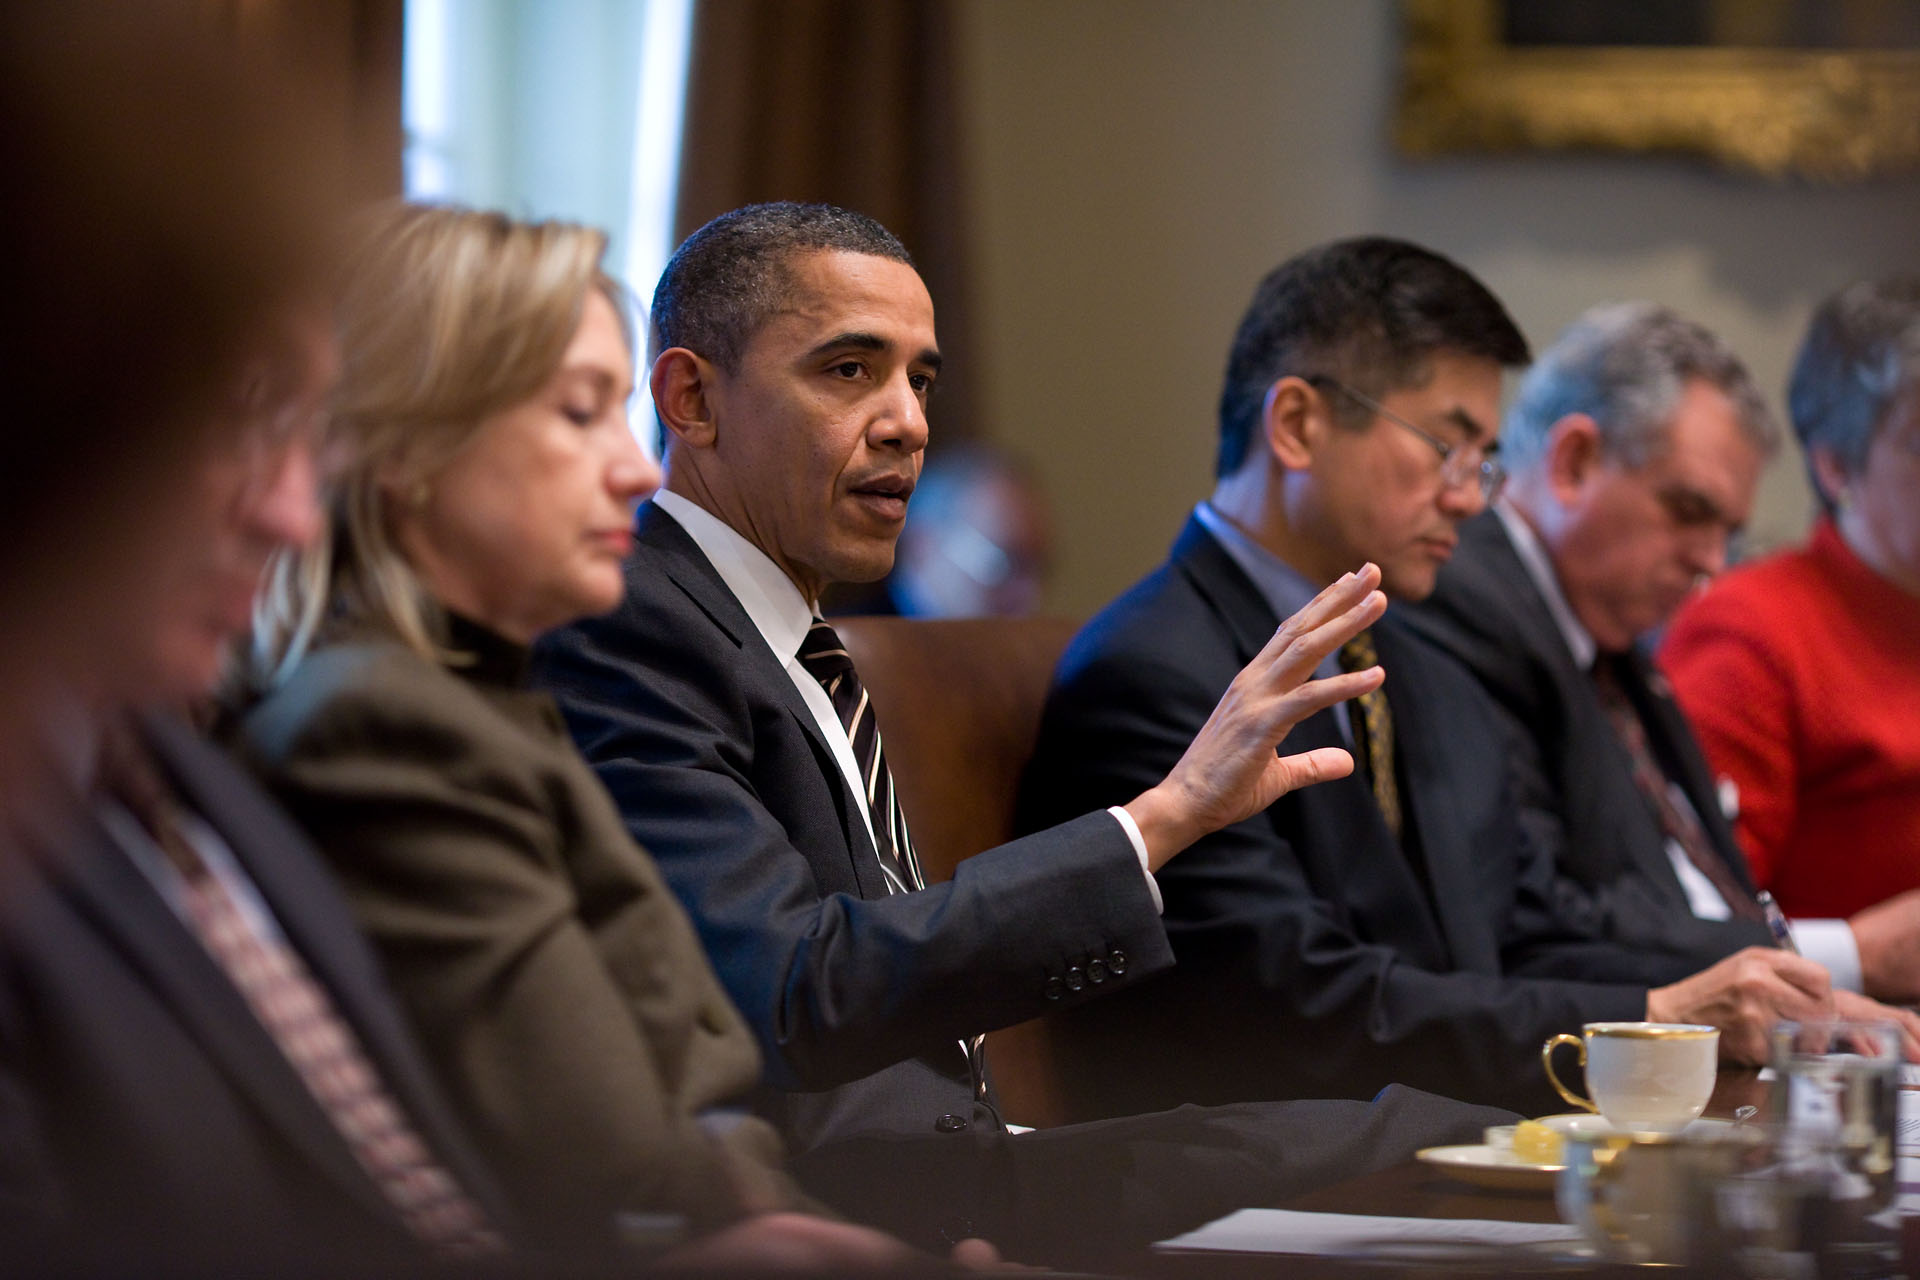 The President Addresses the Cabinet on December 8th, 2010